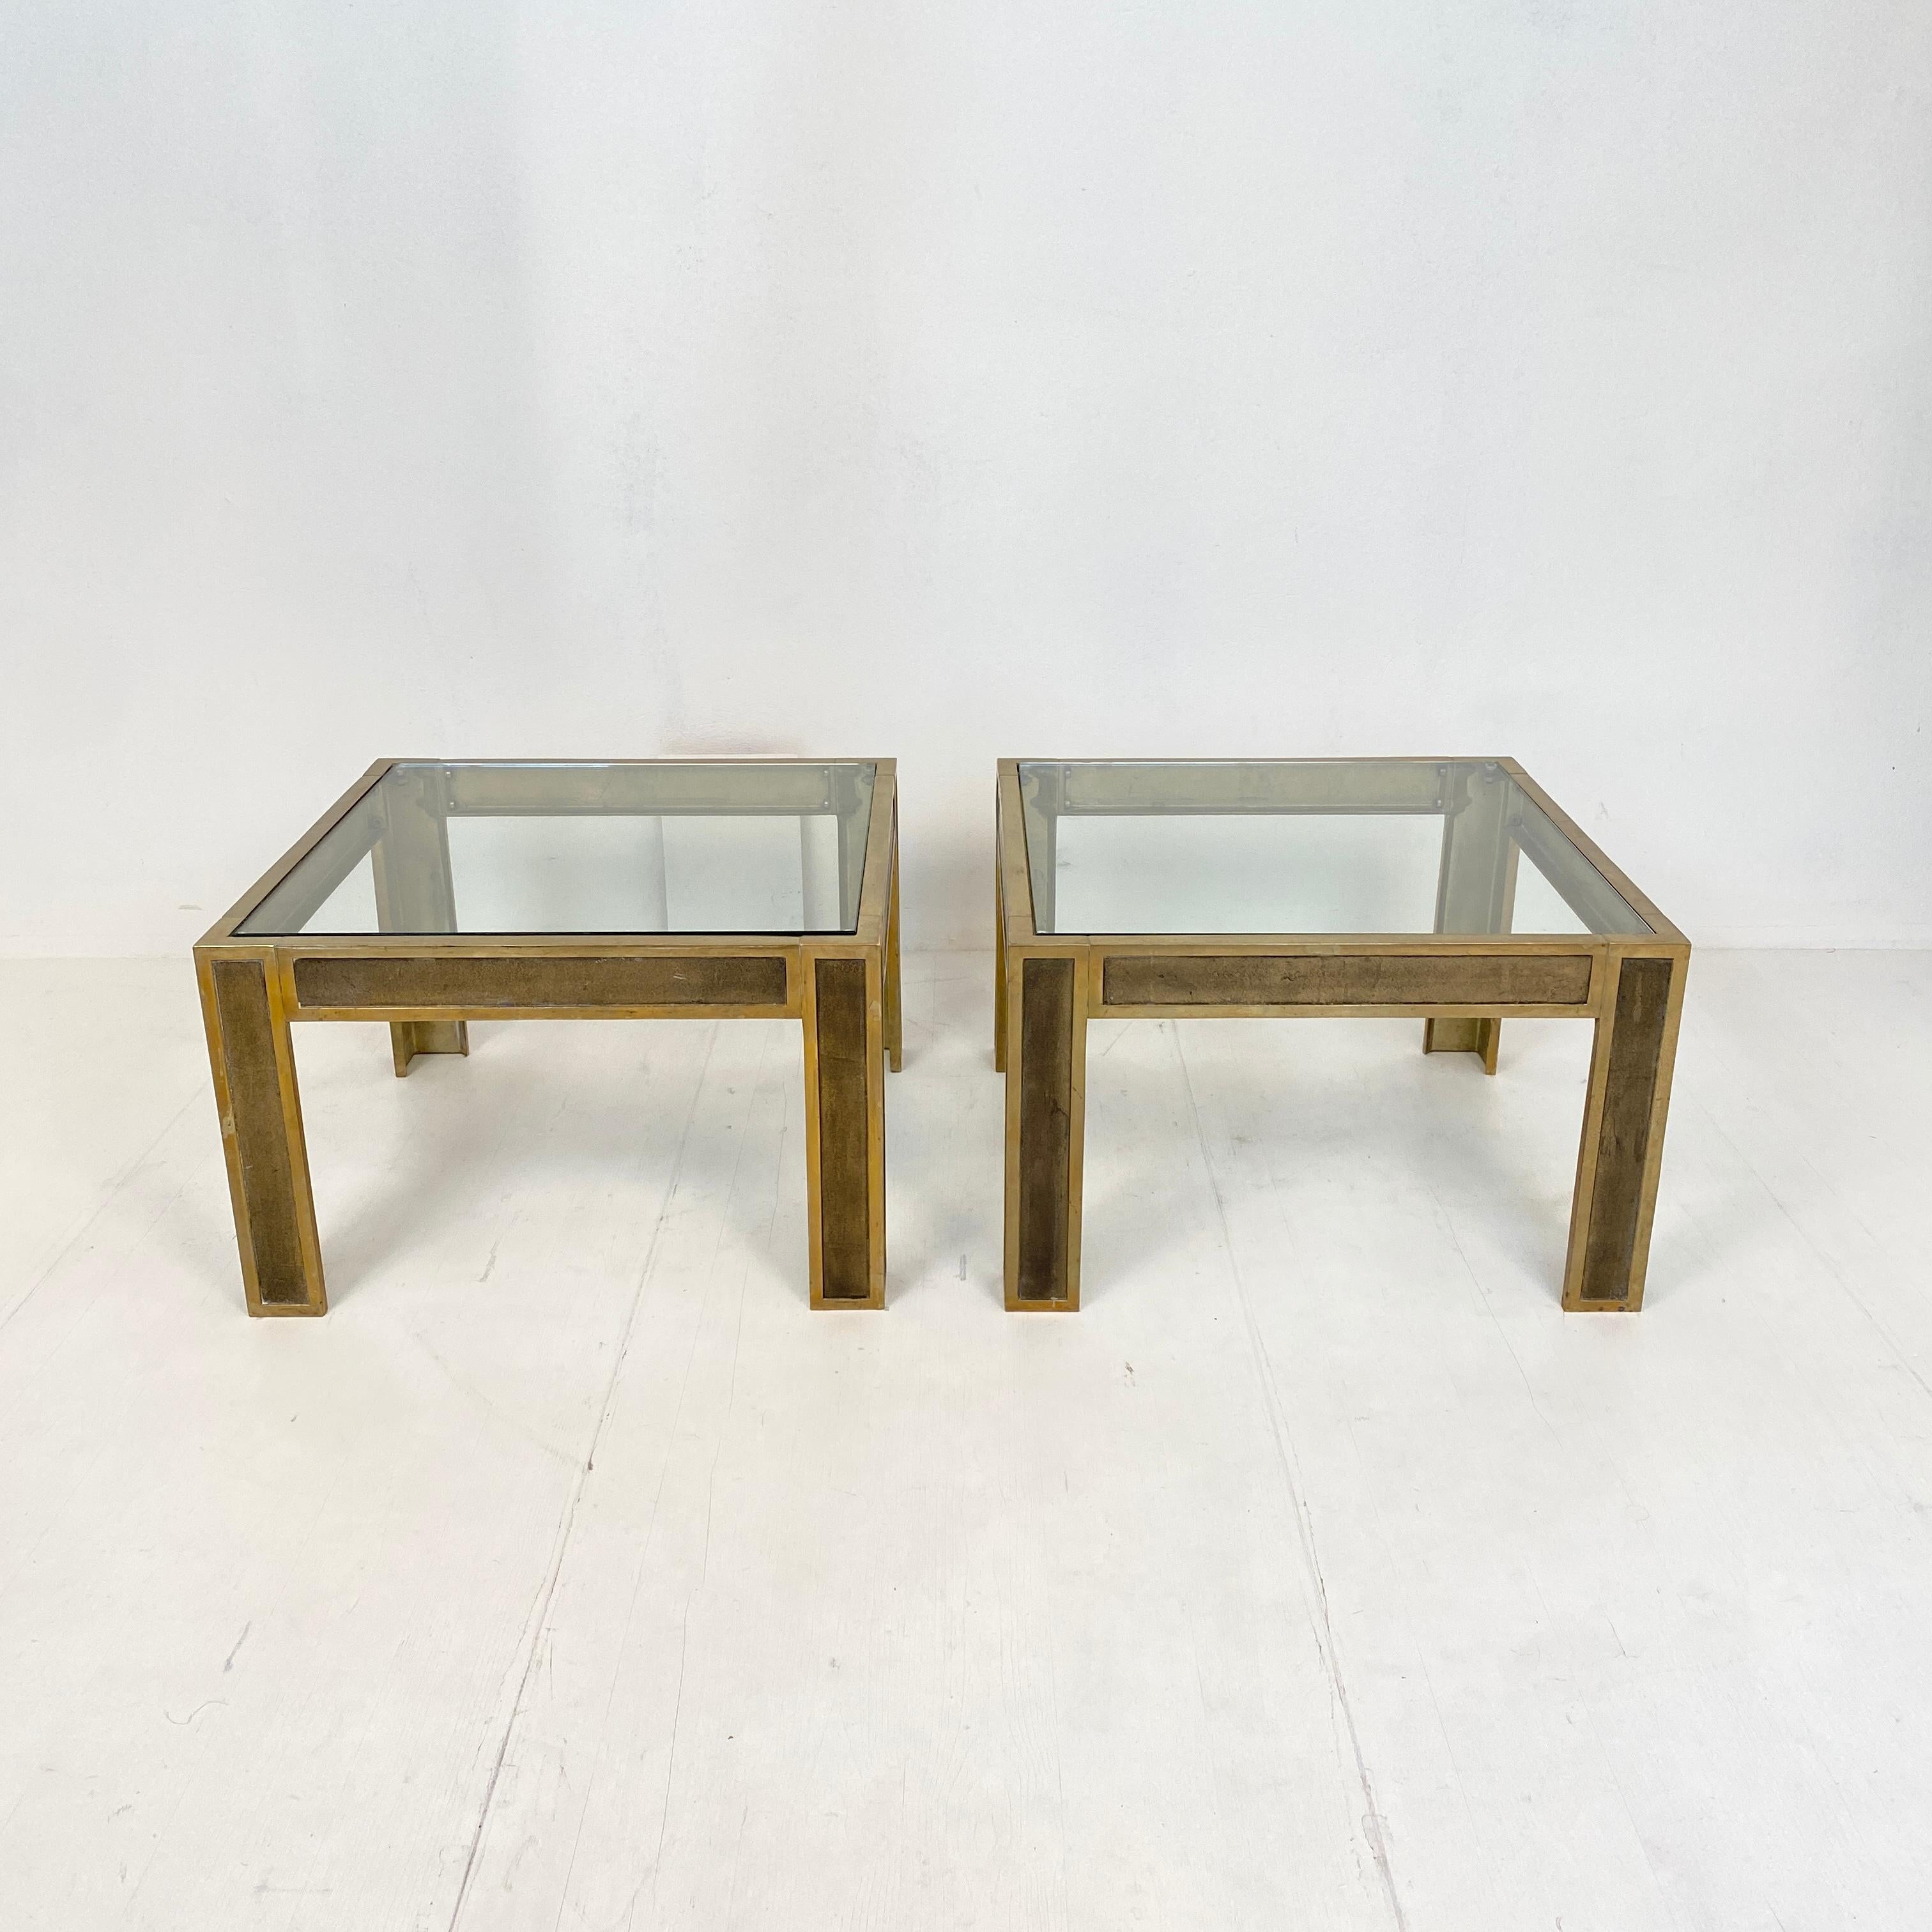 Dutch Pair of Mid-Century Brass and Glass Sofa Tables or Coffee Tables by Ghyczy